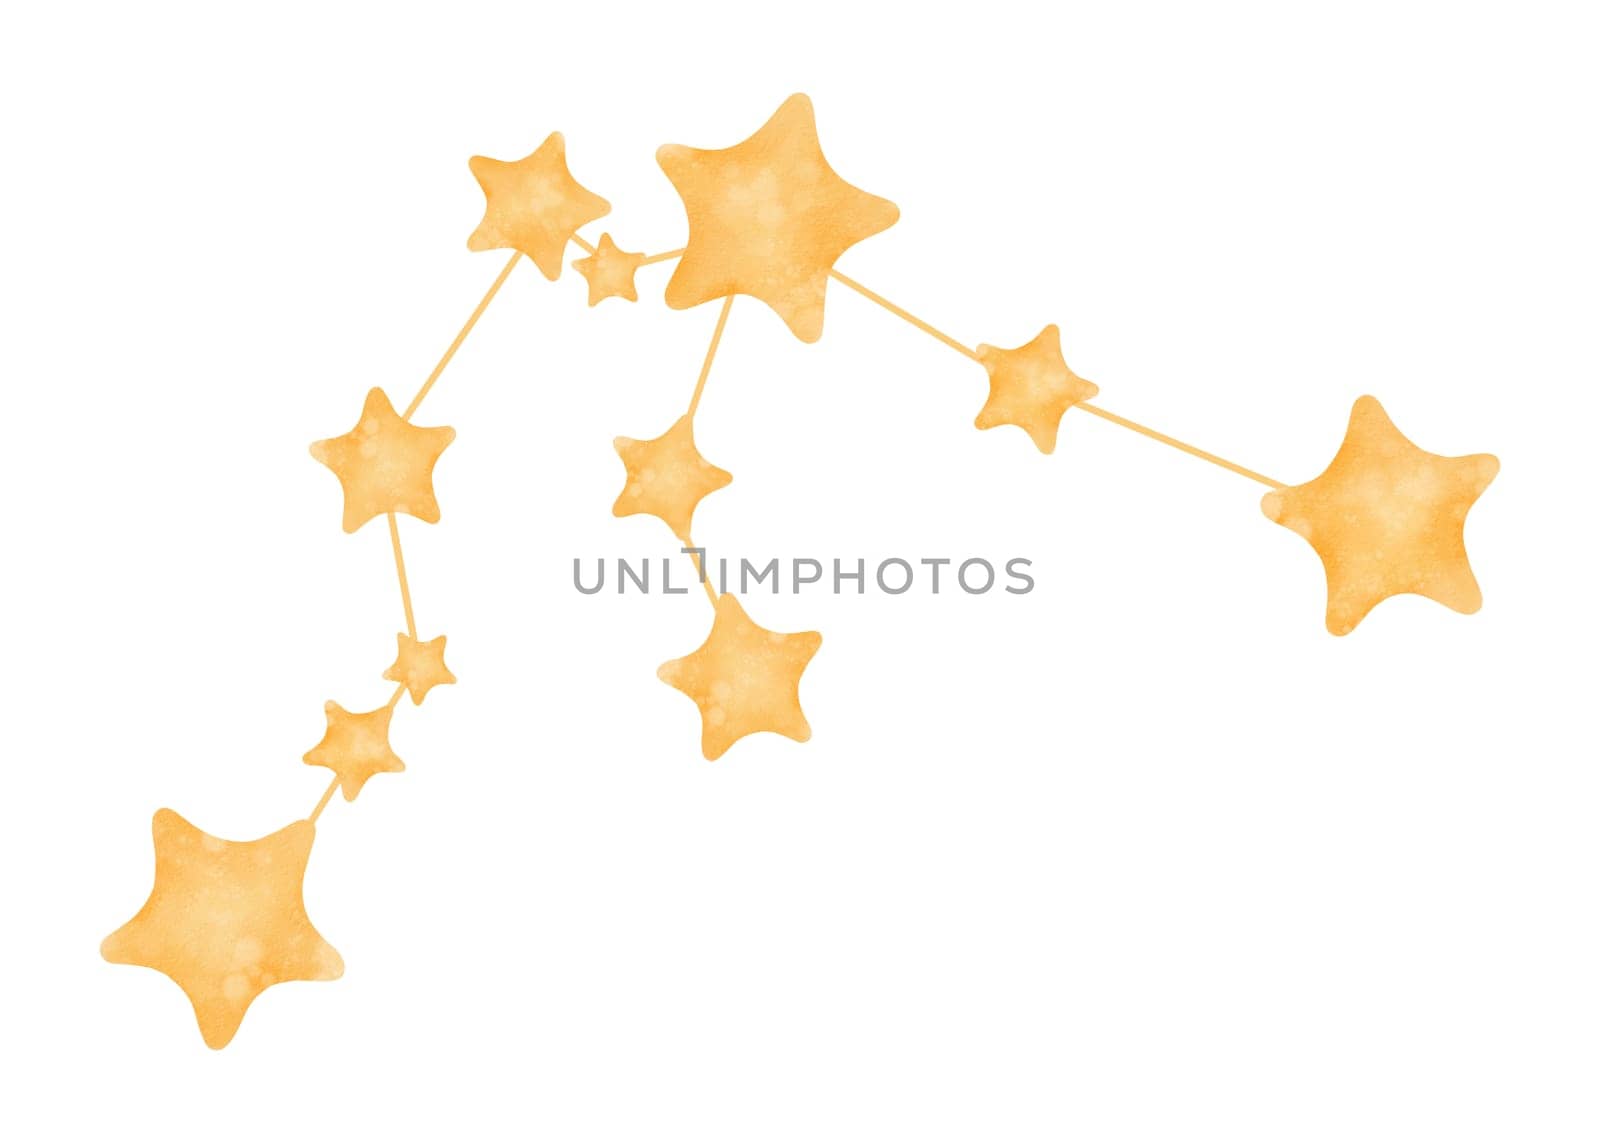 Aquarius Constellation: Isolated watercolor illustration. Zodiac sign. Bright, glowing stars in the sky form an astronomical constellation. for horoscopes, magazines, and astrology. mystical artwork.